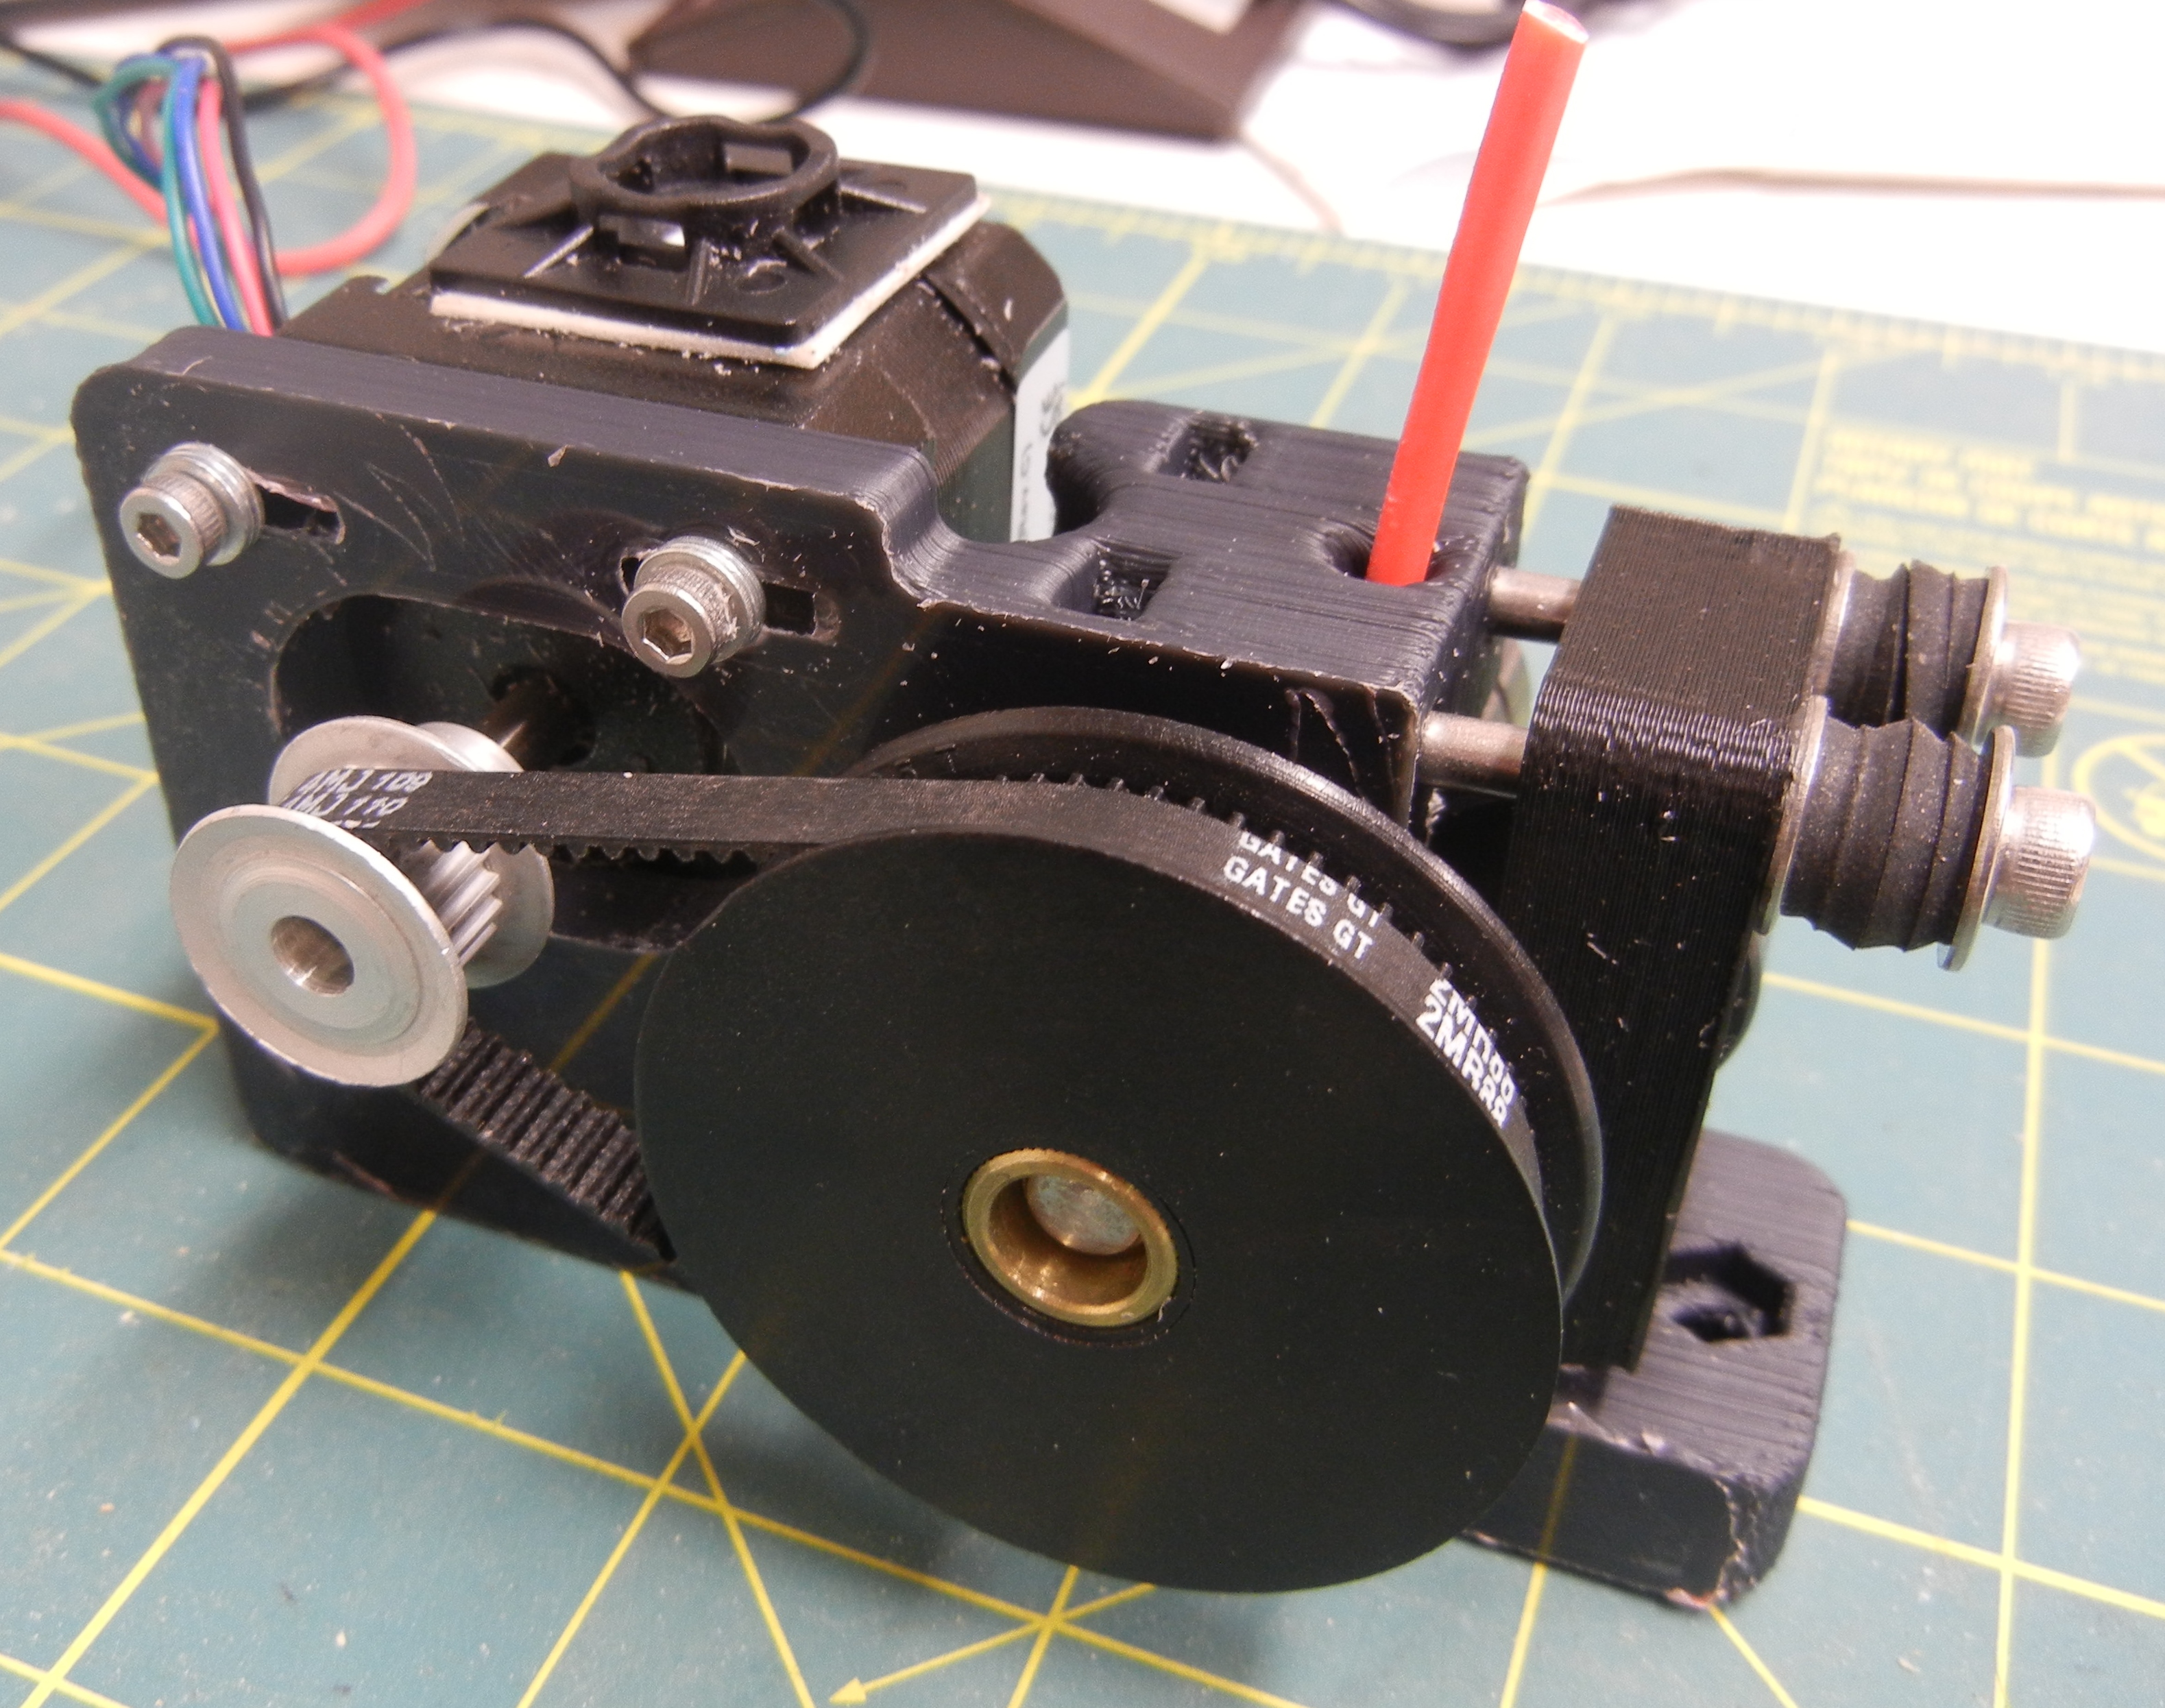 Greg's Wade Accessible Belt Drive Extruder